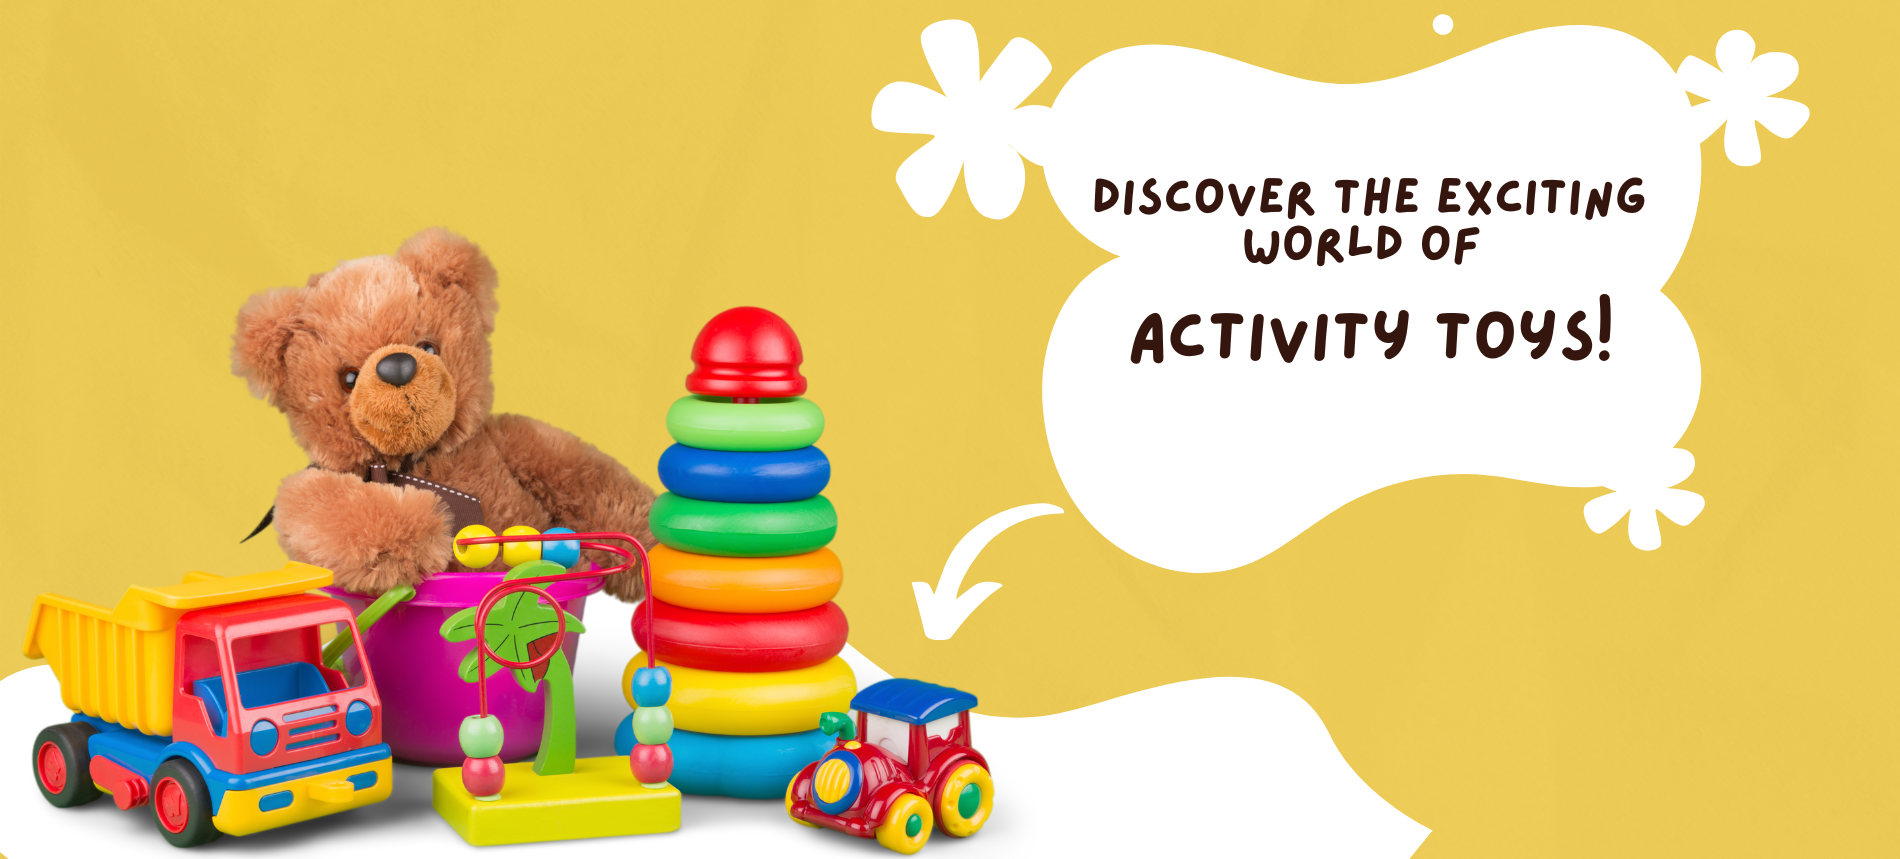 activity%20toys%201.png?1696524657111